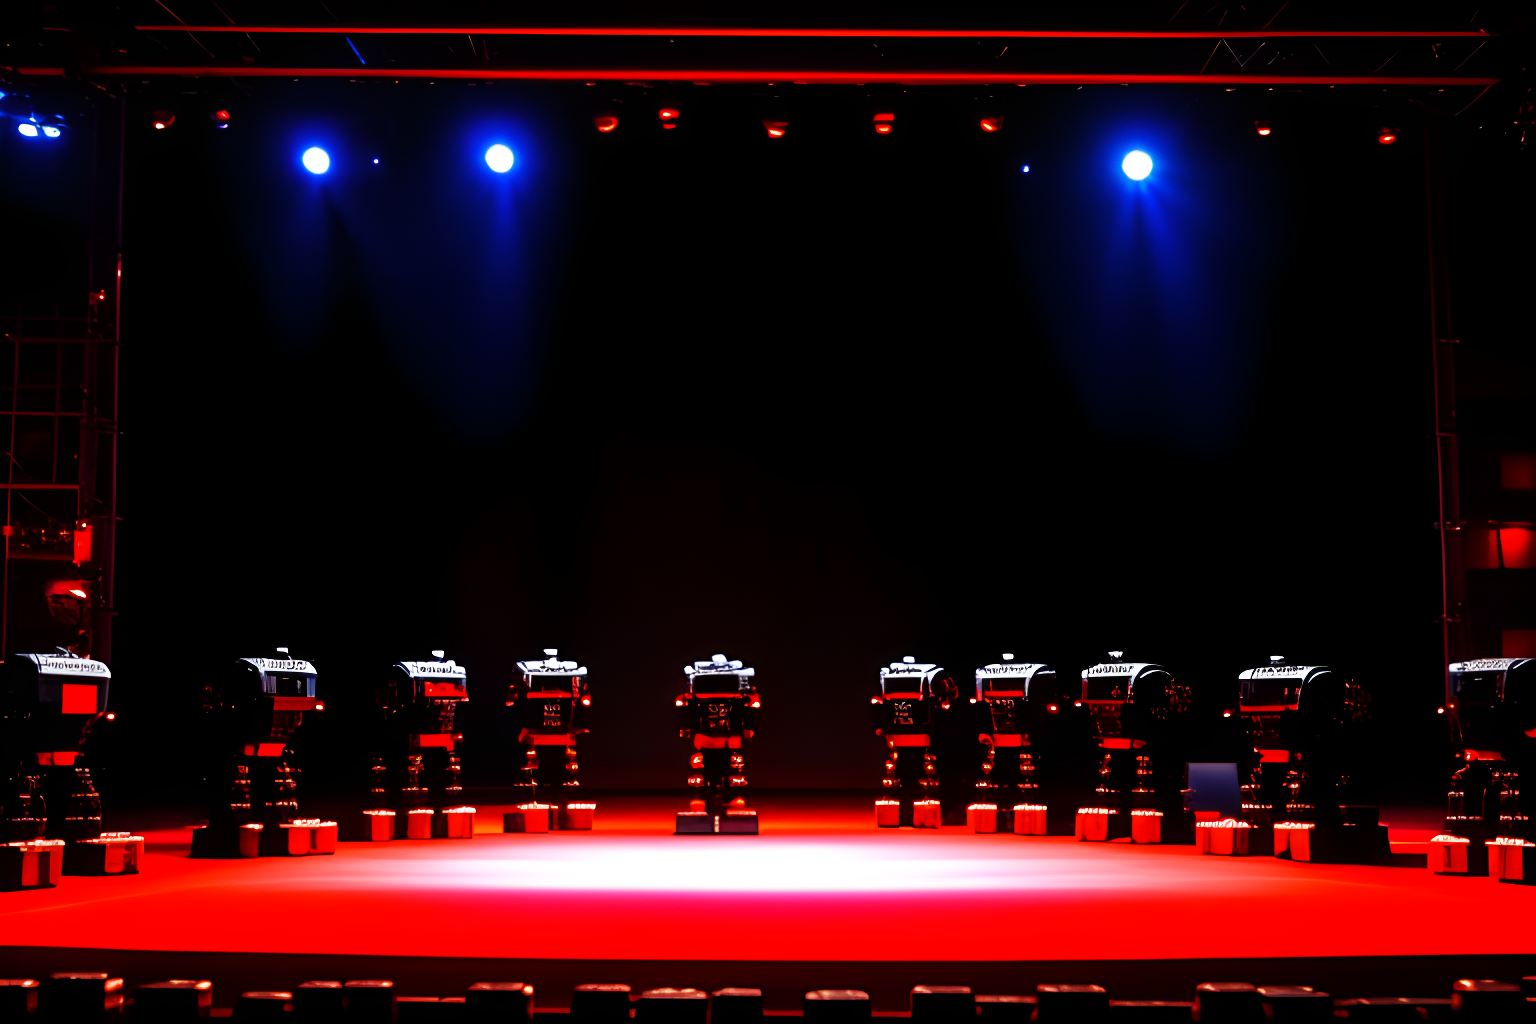 a group of robots bowing on stage in front of an audience